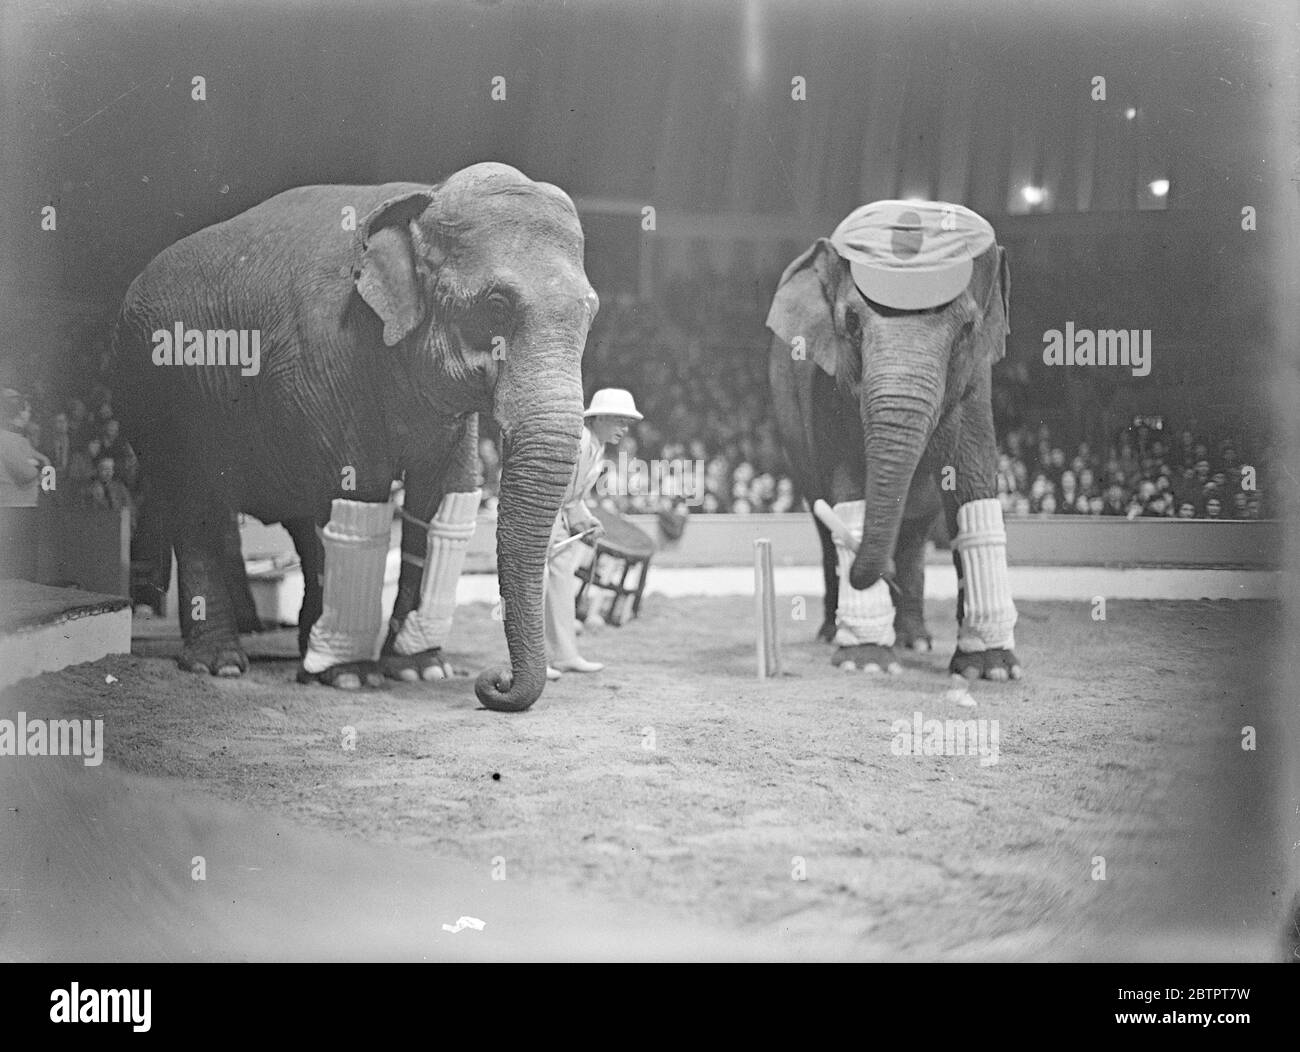 Elephants that play cricket. The batsman complete with cap befitting his proportions, has raised his bat to deal with a delivery. The wicket keeper is vigilant. 22 December 1932 Stock Photo